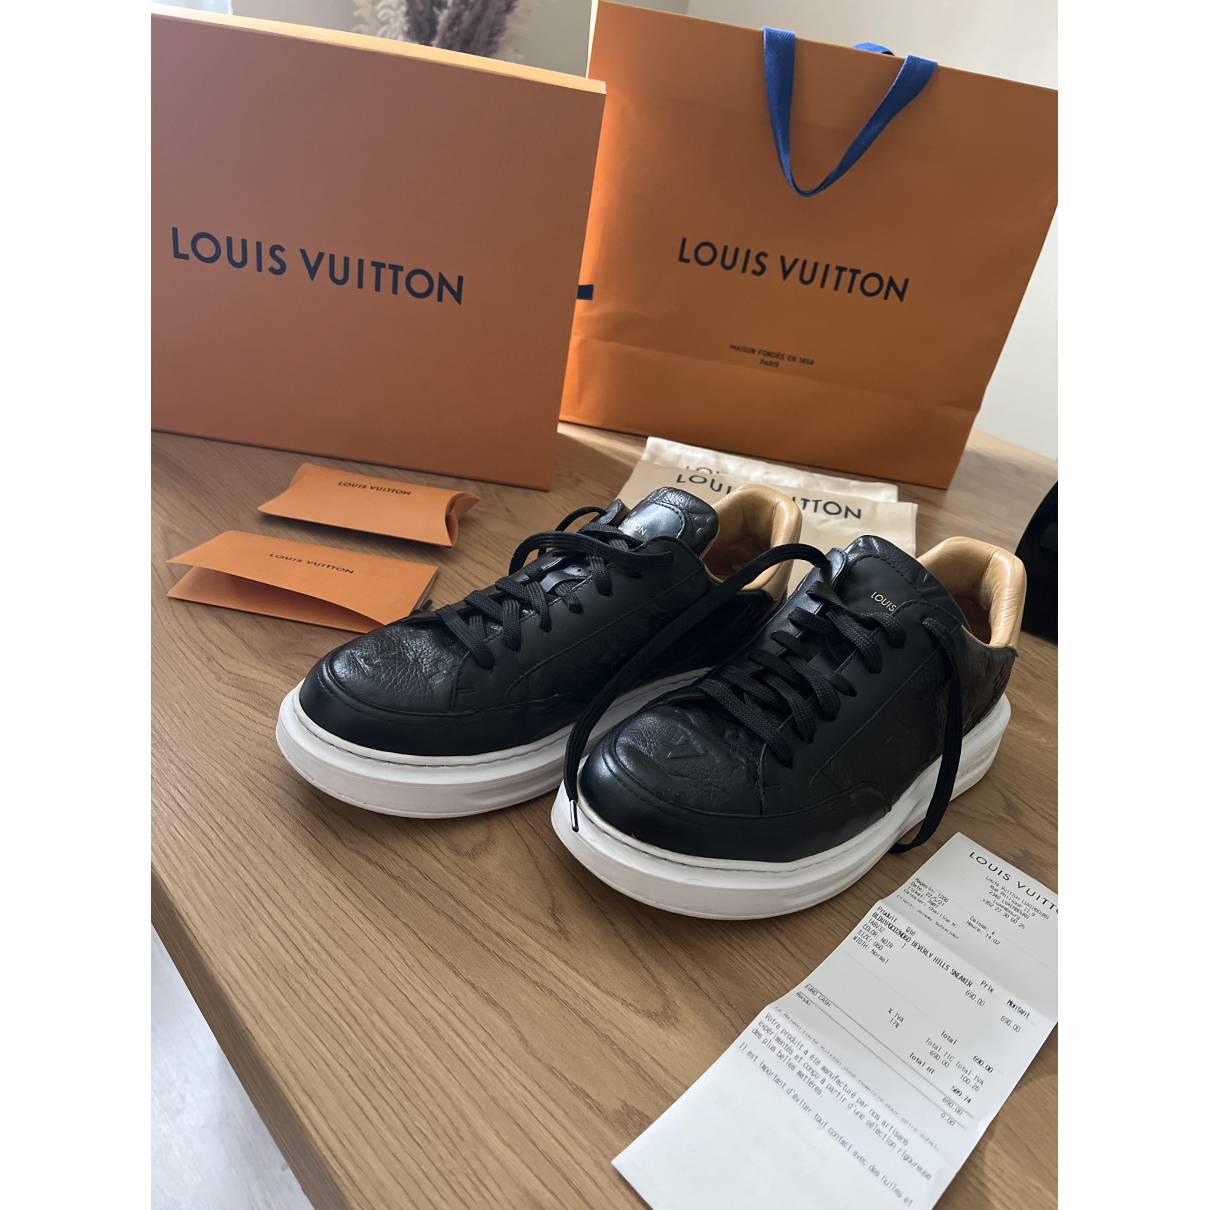 Beverly hills leather low trainers Louis Vuitton Black size 41 EU